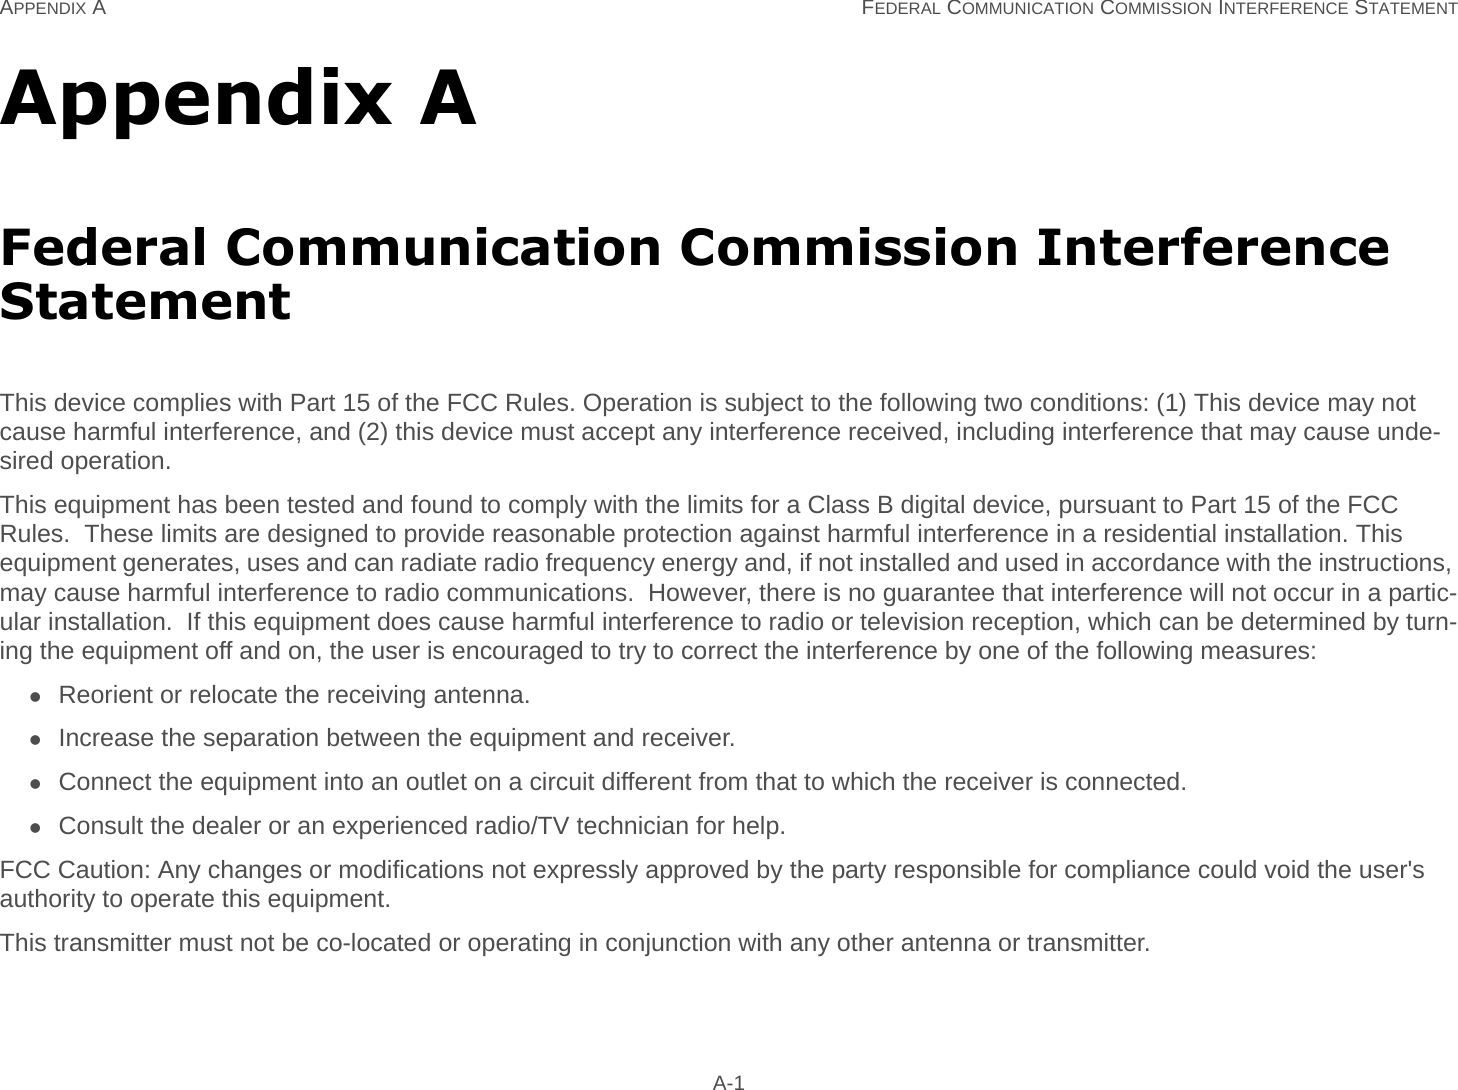 APPENDIX A FEDERAL COMMUNICATION COMMISSION INTERFERENCE STATEMENT A-1Appendix AFederal Communication Commission Interference StatementThis device complies with Part 15 of the FCC Rules. Operation is subject to the following two conditions: (1) This device may not cause harmful interference, and (2) this device must accept any interference received, including interference that may cause unde-sired operation.This equipment has been tested and found to comply with the limits for a Class B digital device, pursuant to Part 15 of the FCC Rules.  These limits are designed to provide reasonable protection against harmful interference in a residential installation. This equipment generates, uses and can radiate radio frequency energy and, if not installed and used in accordance with the instructions, may cause harmful interference to radio communications.  However, there is no guarantee that interference will not occur in a partic-ular installation.  If this equipment does cause harmful interference to radio or television reception, which can be determined by turn-ing the equipment off and on, the user is encouraged to try to correct the interference by one of the following measures:Reorient or relocate the receiving antenna.Increase the separation between the equipment and receiver.Connect the equipment into an outlet on a circuit different from that to which the receiver is connected.Consult the dealer or an experienced radio/TV technician for help.FCC Caution: Any changes or modifications not expressly approved by the party responsible for compliance could void the user&apos;s authority to operate this equipment.This transmitter must not be co-located or operating in conjunction with any other antenna or transmitter.